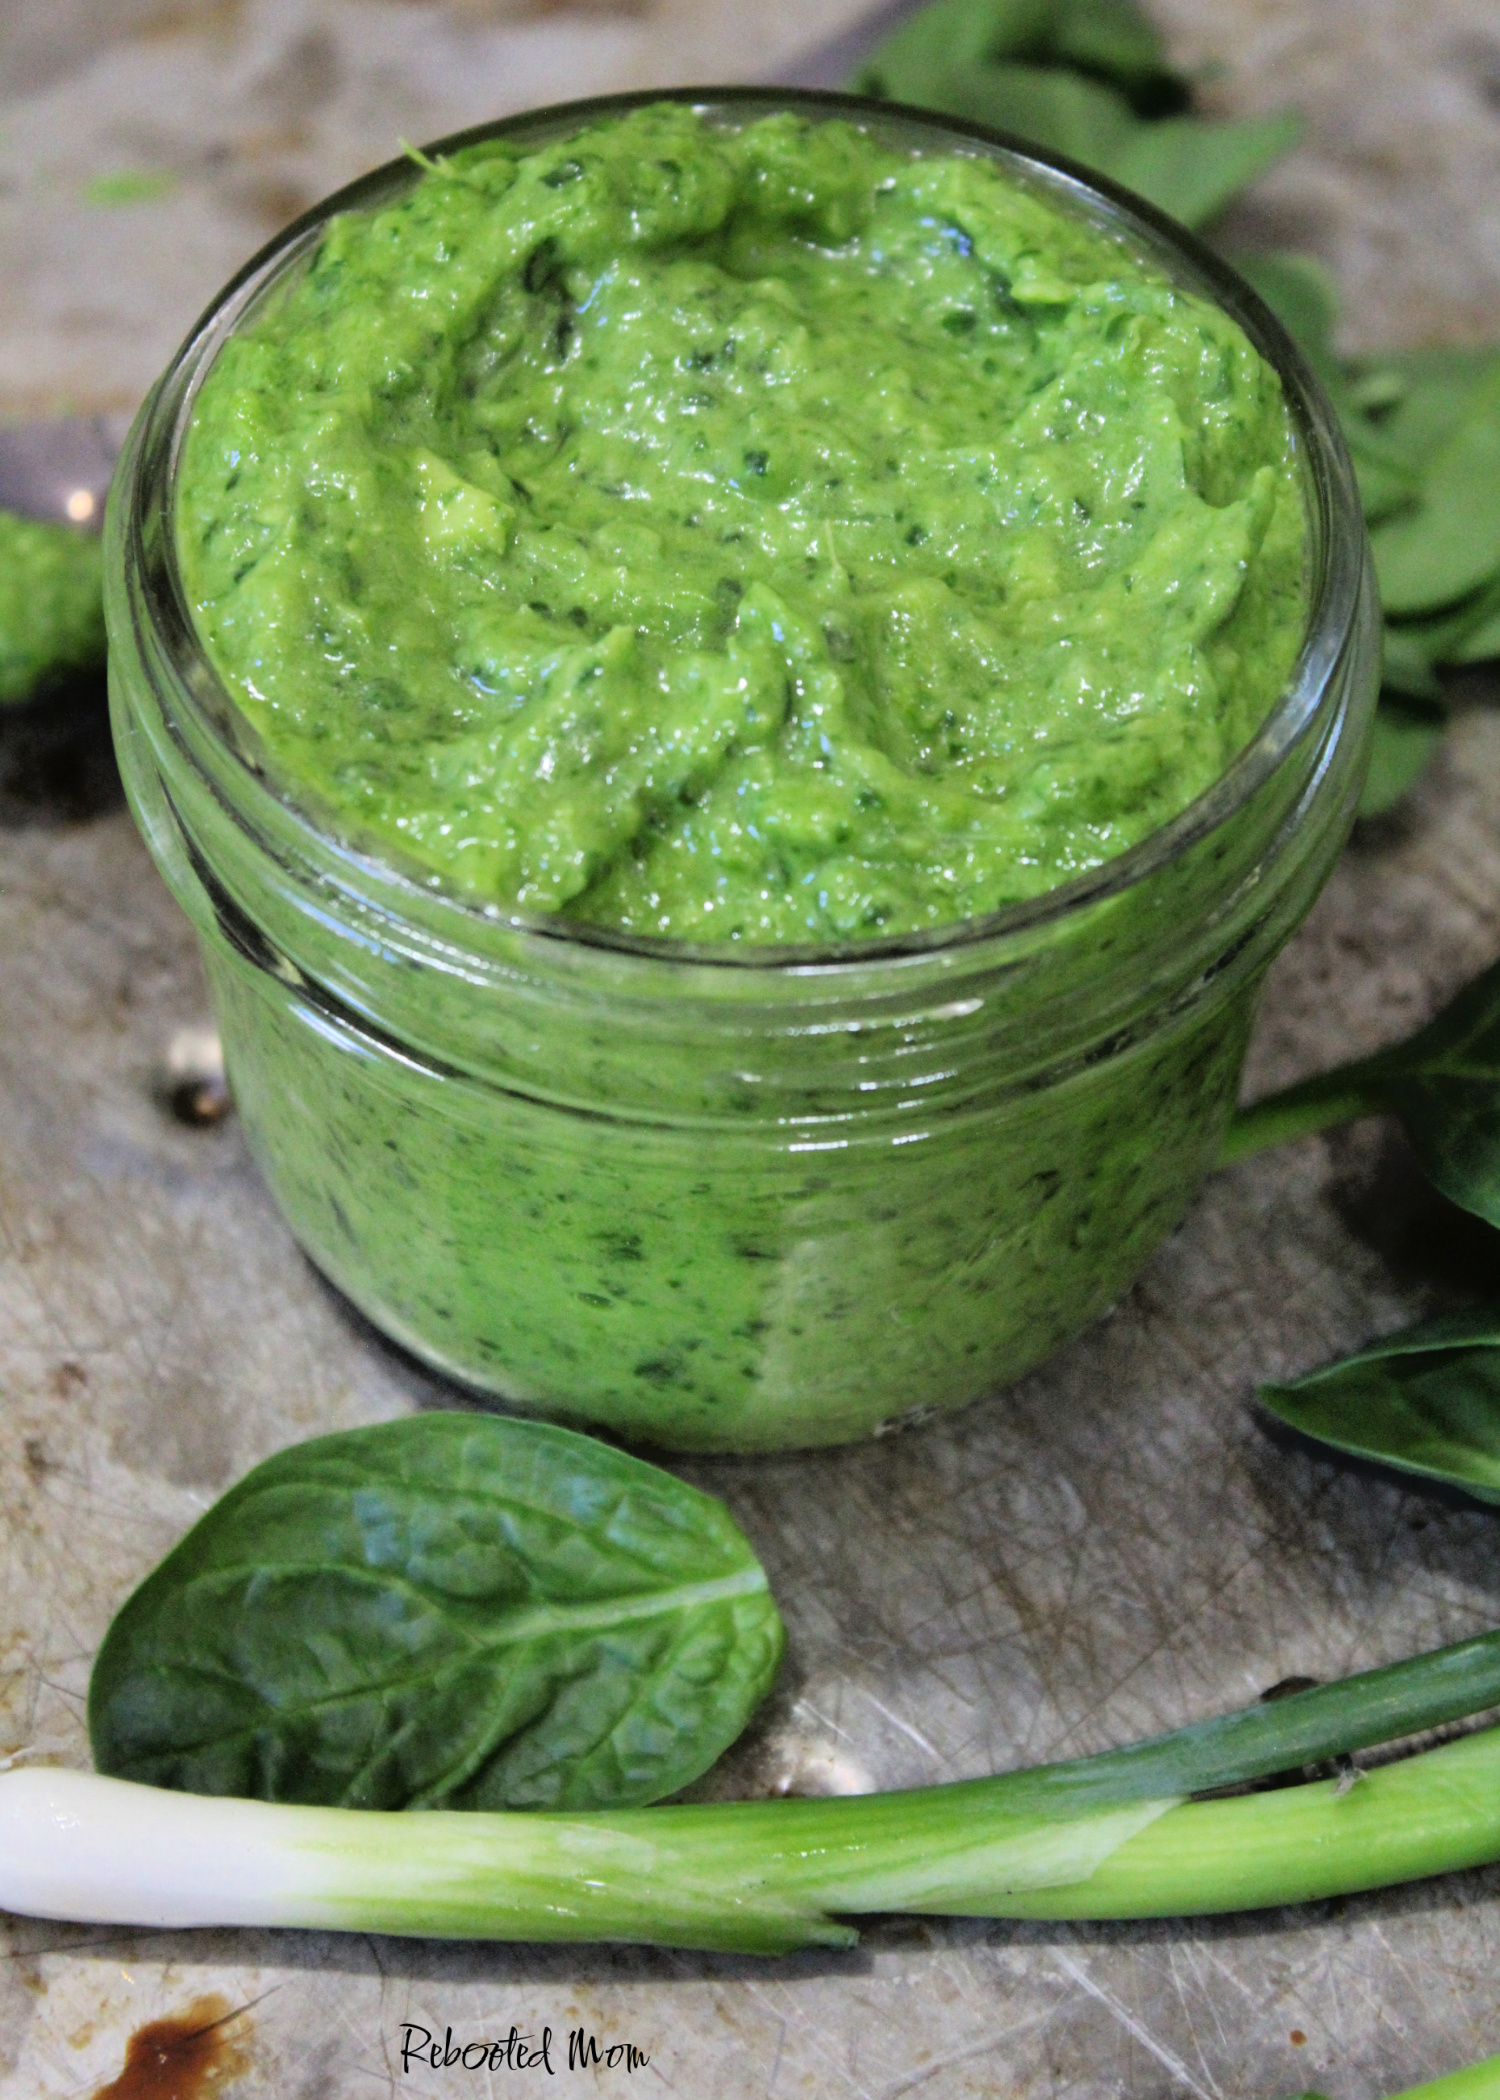 Ginger Scallion Pesto combines flavorful scallions with fresh ginger in a pesto that's a twist on traditional pesto varieties - perfect as a topper for steak or chicken!